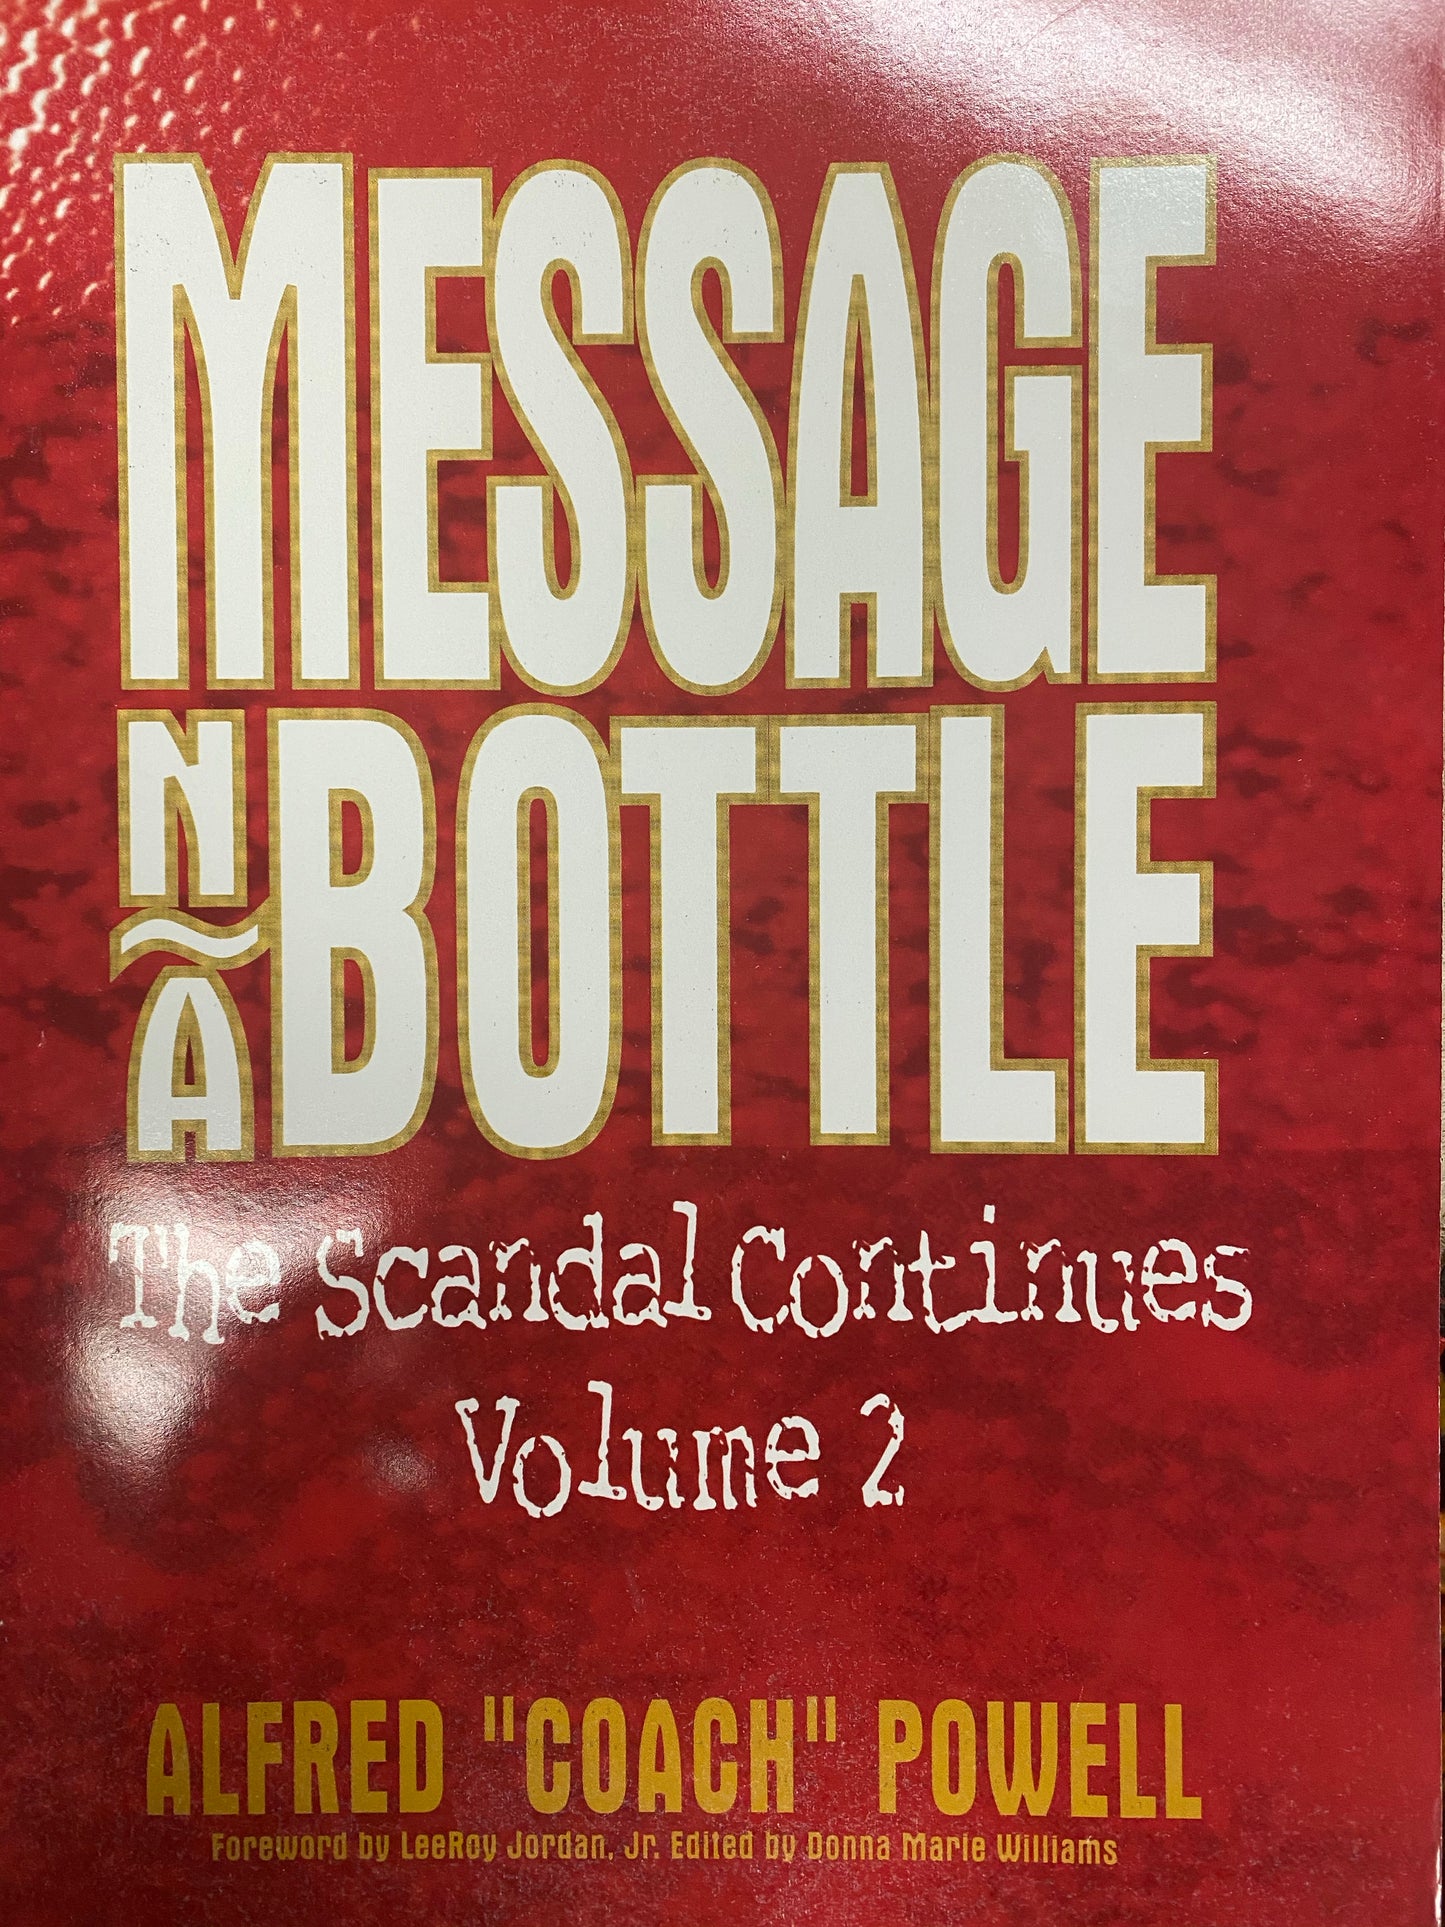 "Message n a Bottle: The Scandal Continues - Volume 2" by Alfred "Coach" Powell